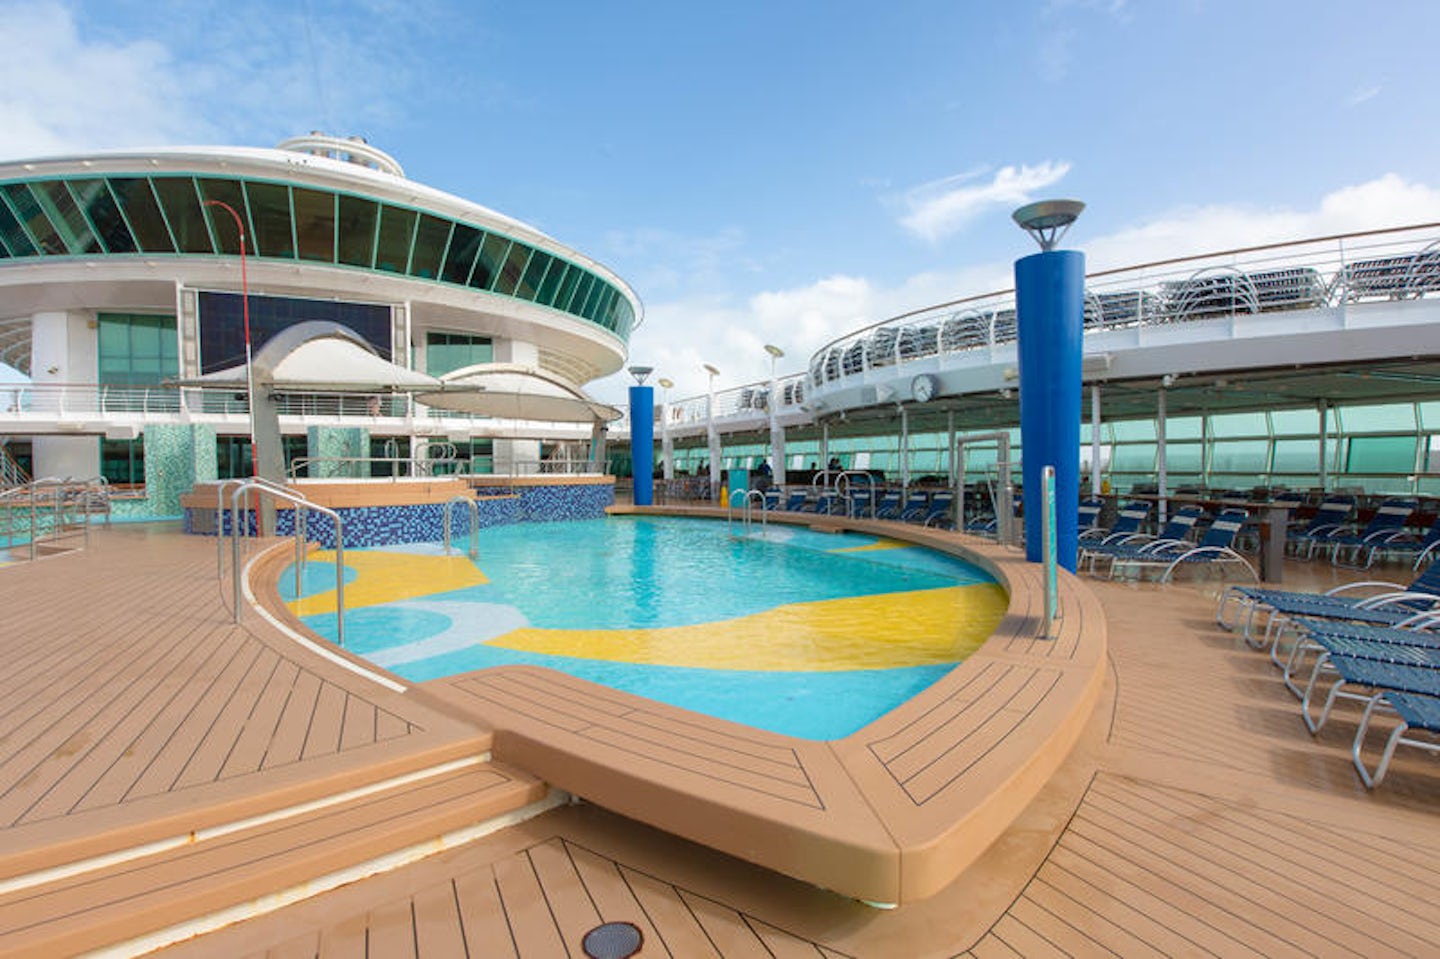 Pool Deck on Royal Caribbean Voyager of the Seas Cruise Ship - Cruise ...